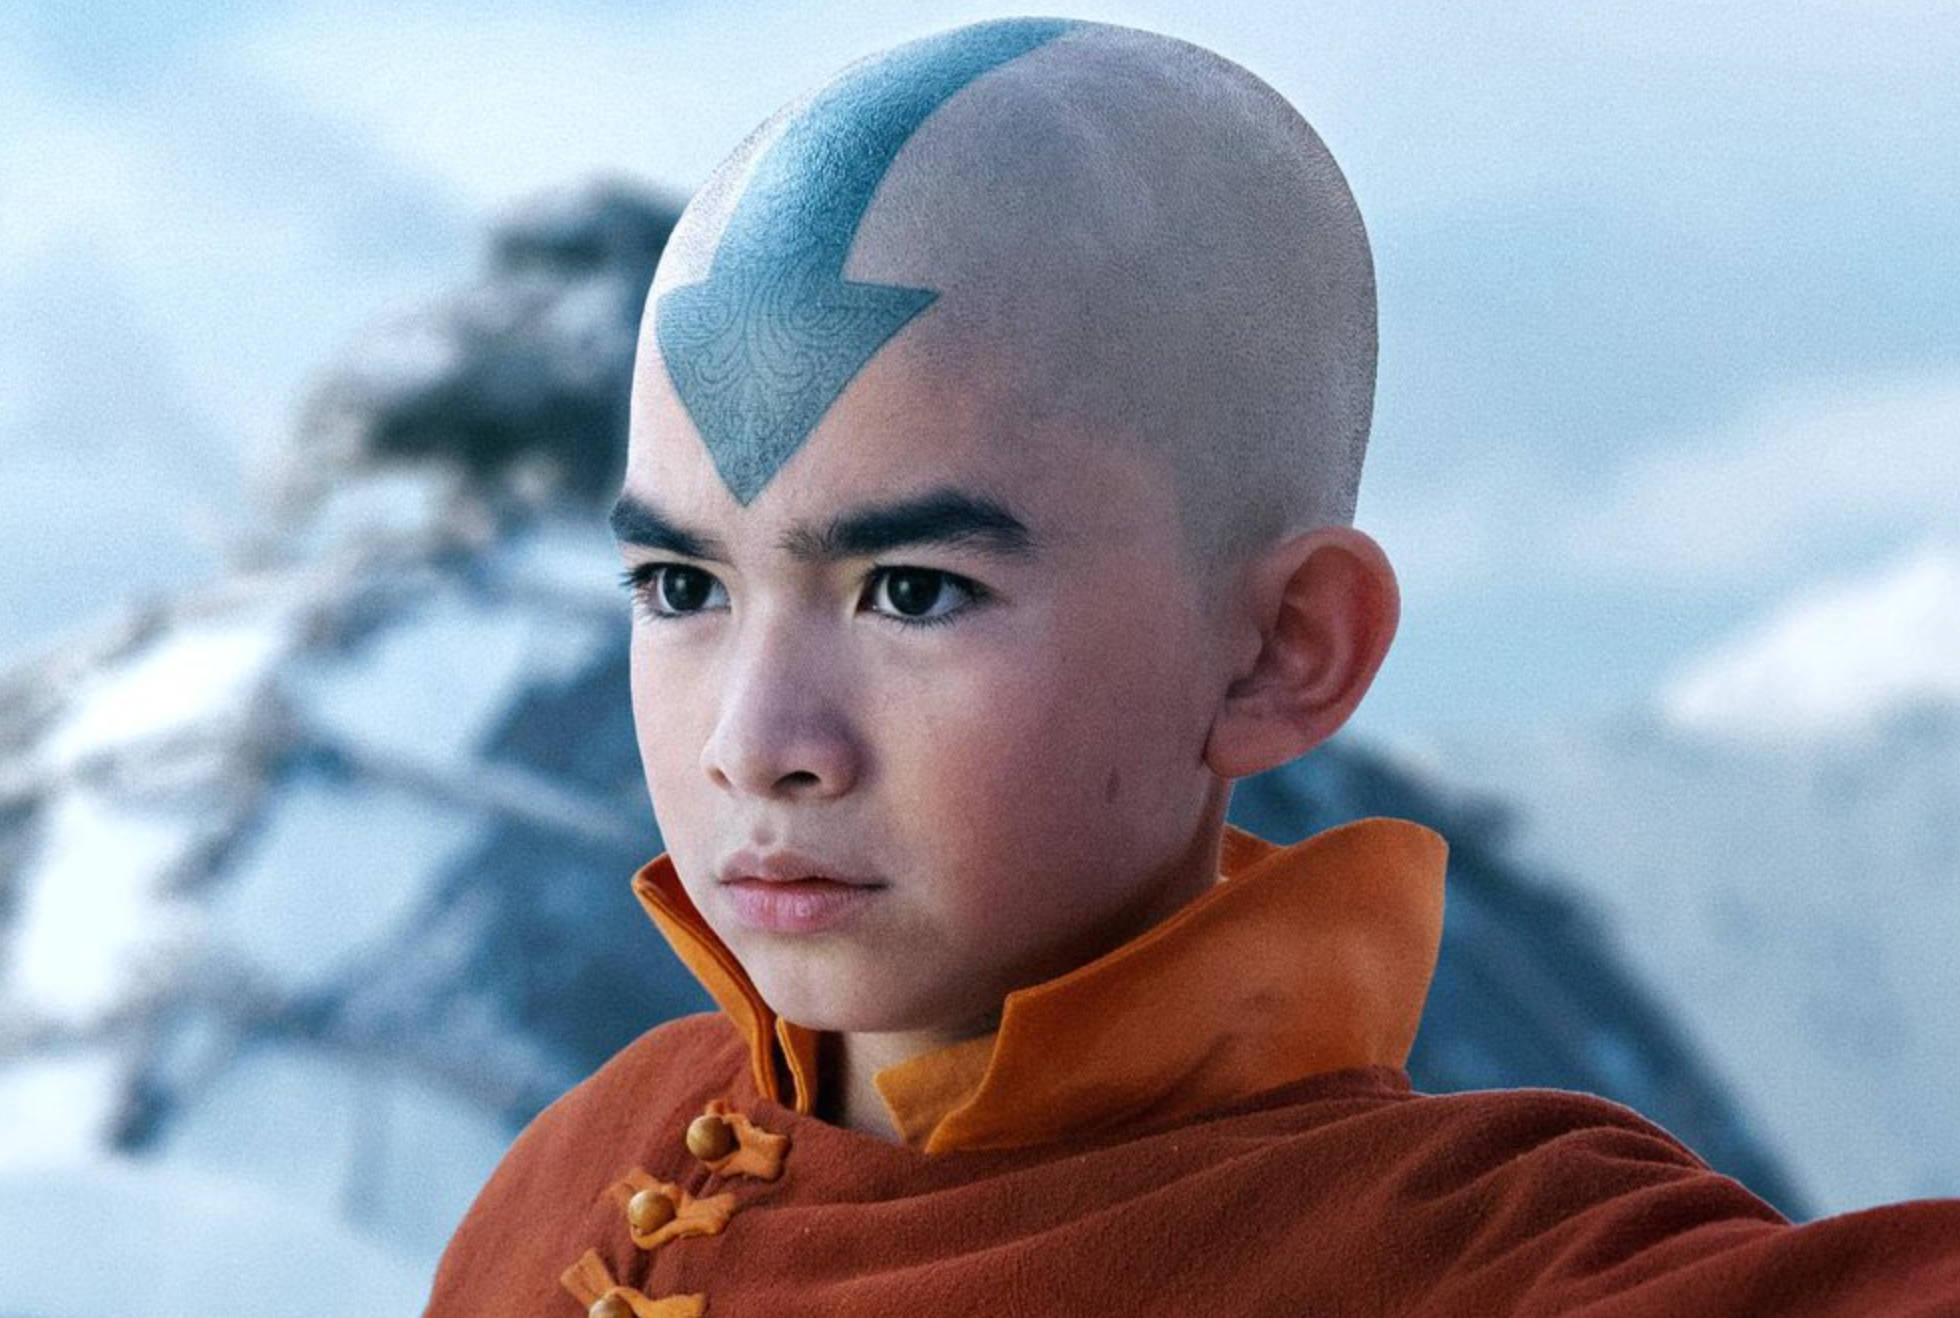 Avatar The Last Airbender Netflix Releases First Look Photos  Teaser Of  LiveAction Series Ahead Of 2024 Release  Tudum  Deadline